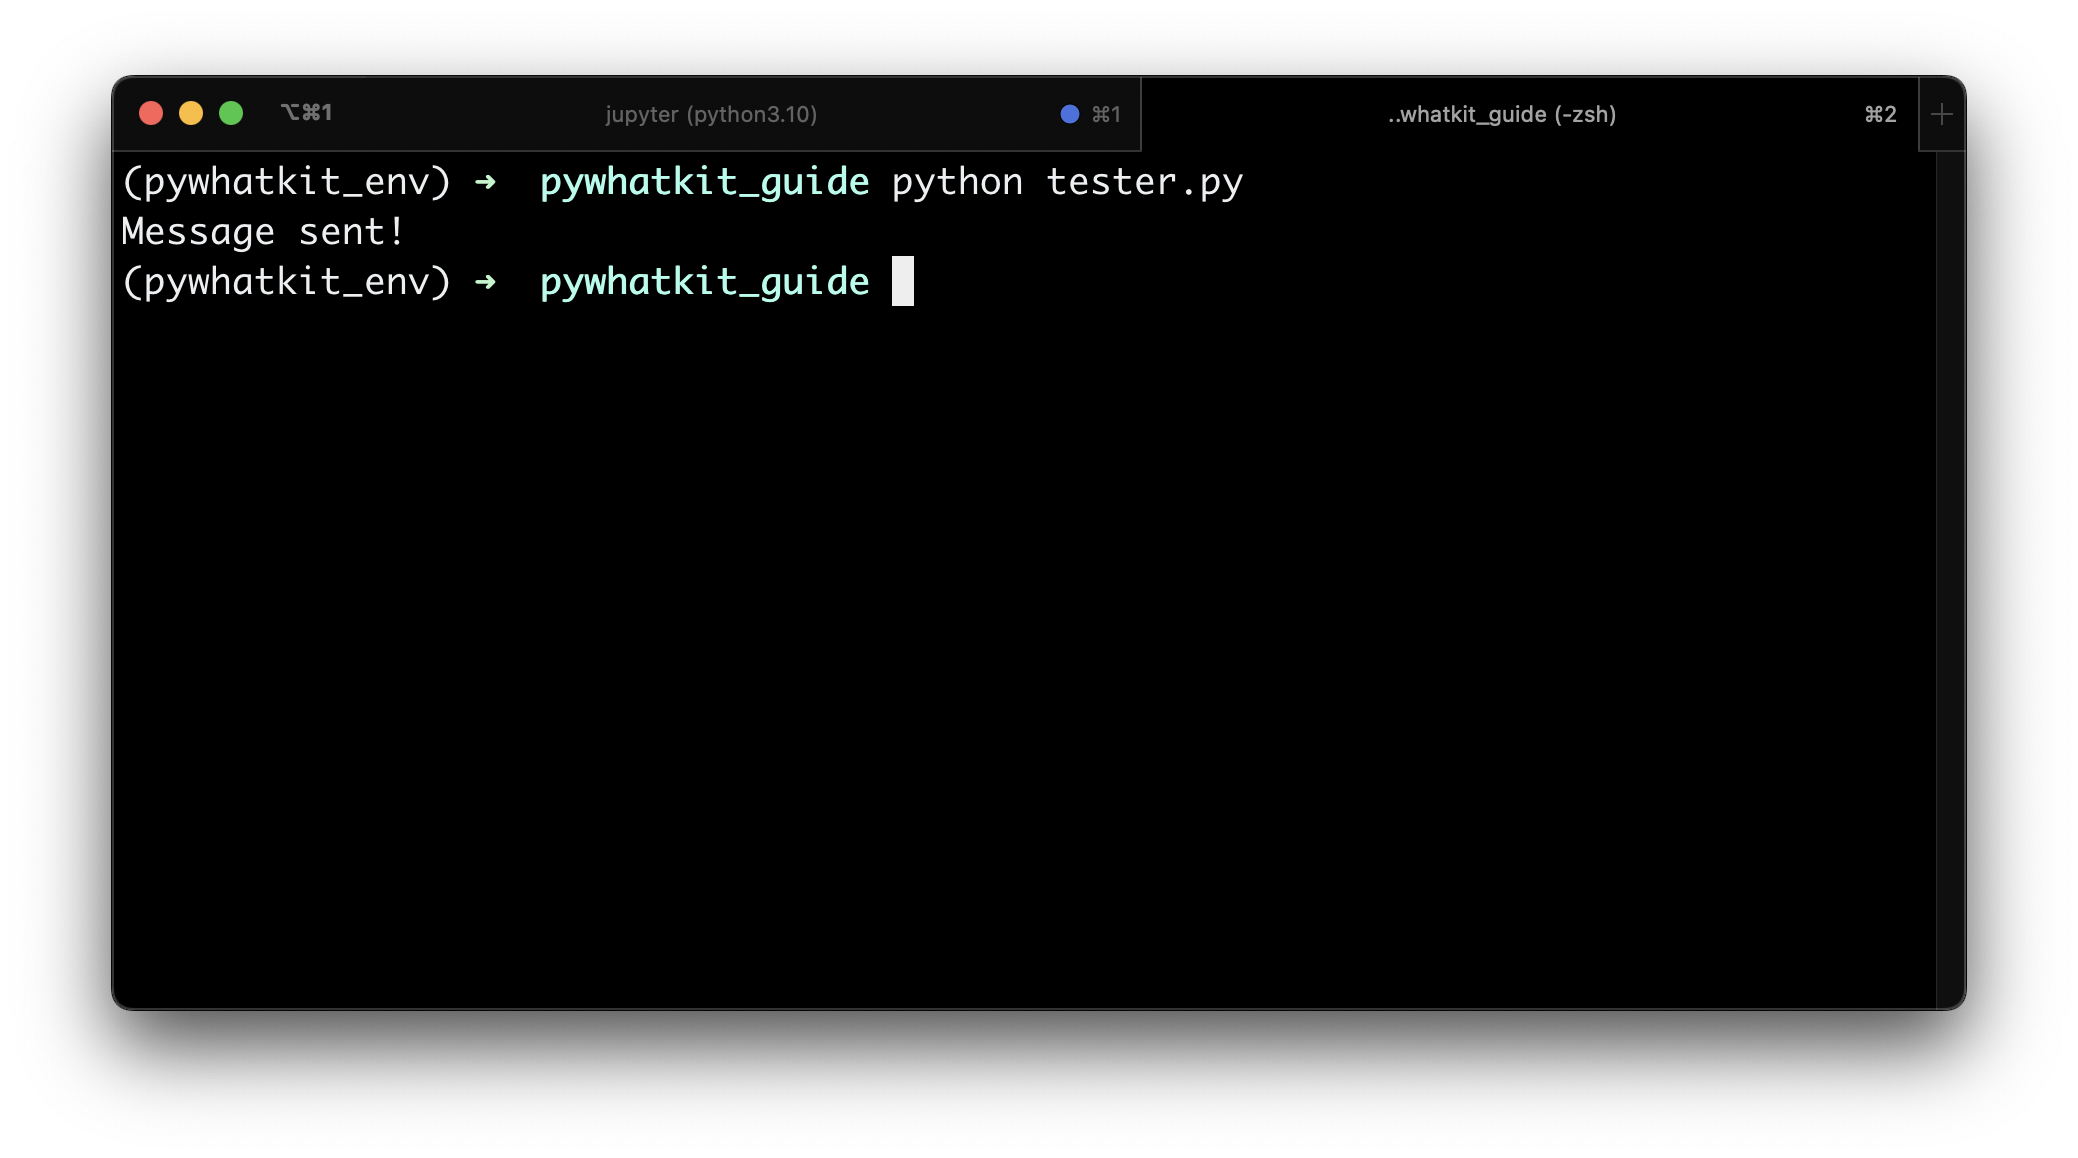 Image 5 - Running a Python script through the Terminal (image by author)